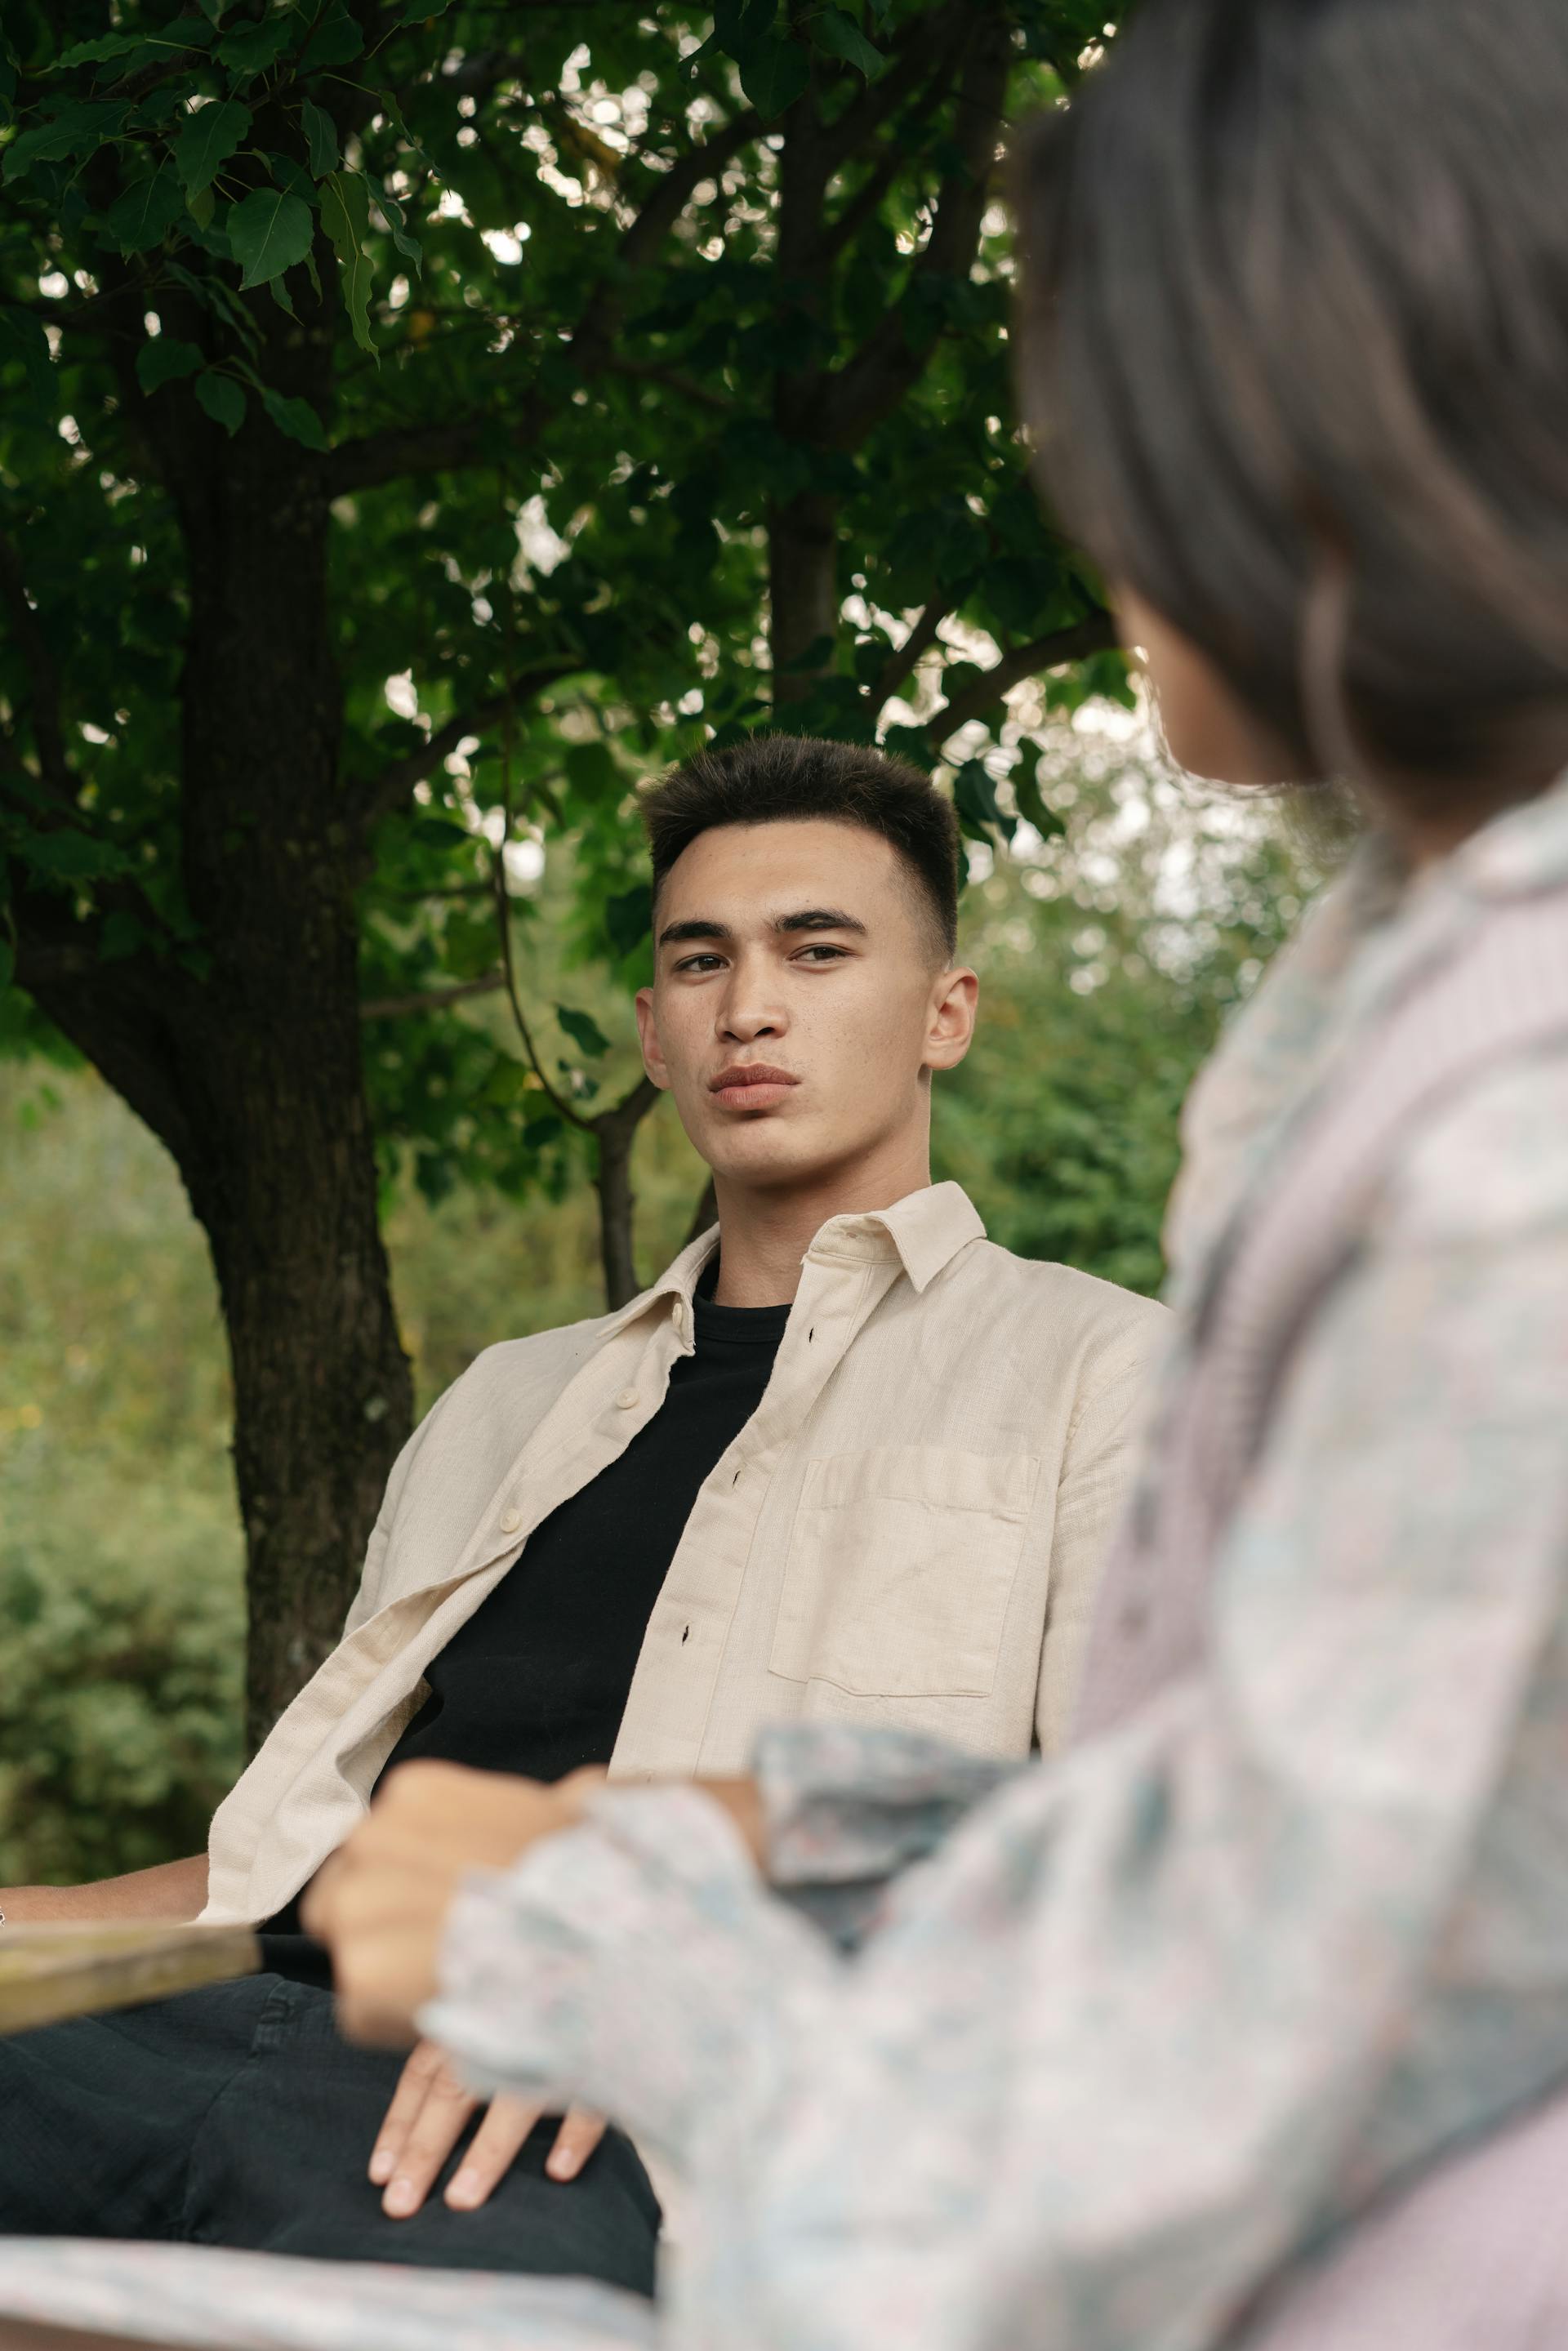 A worried man talking to a woman while sitting outside | Source: Pexels